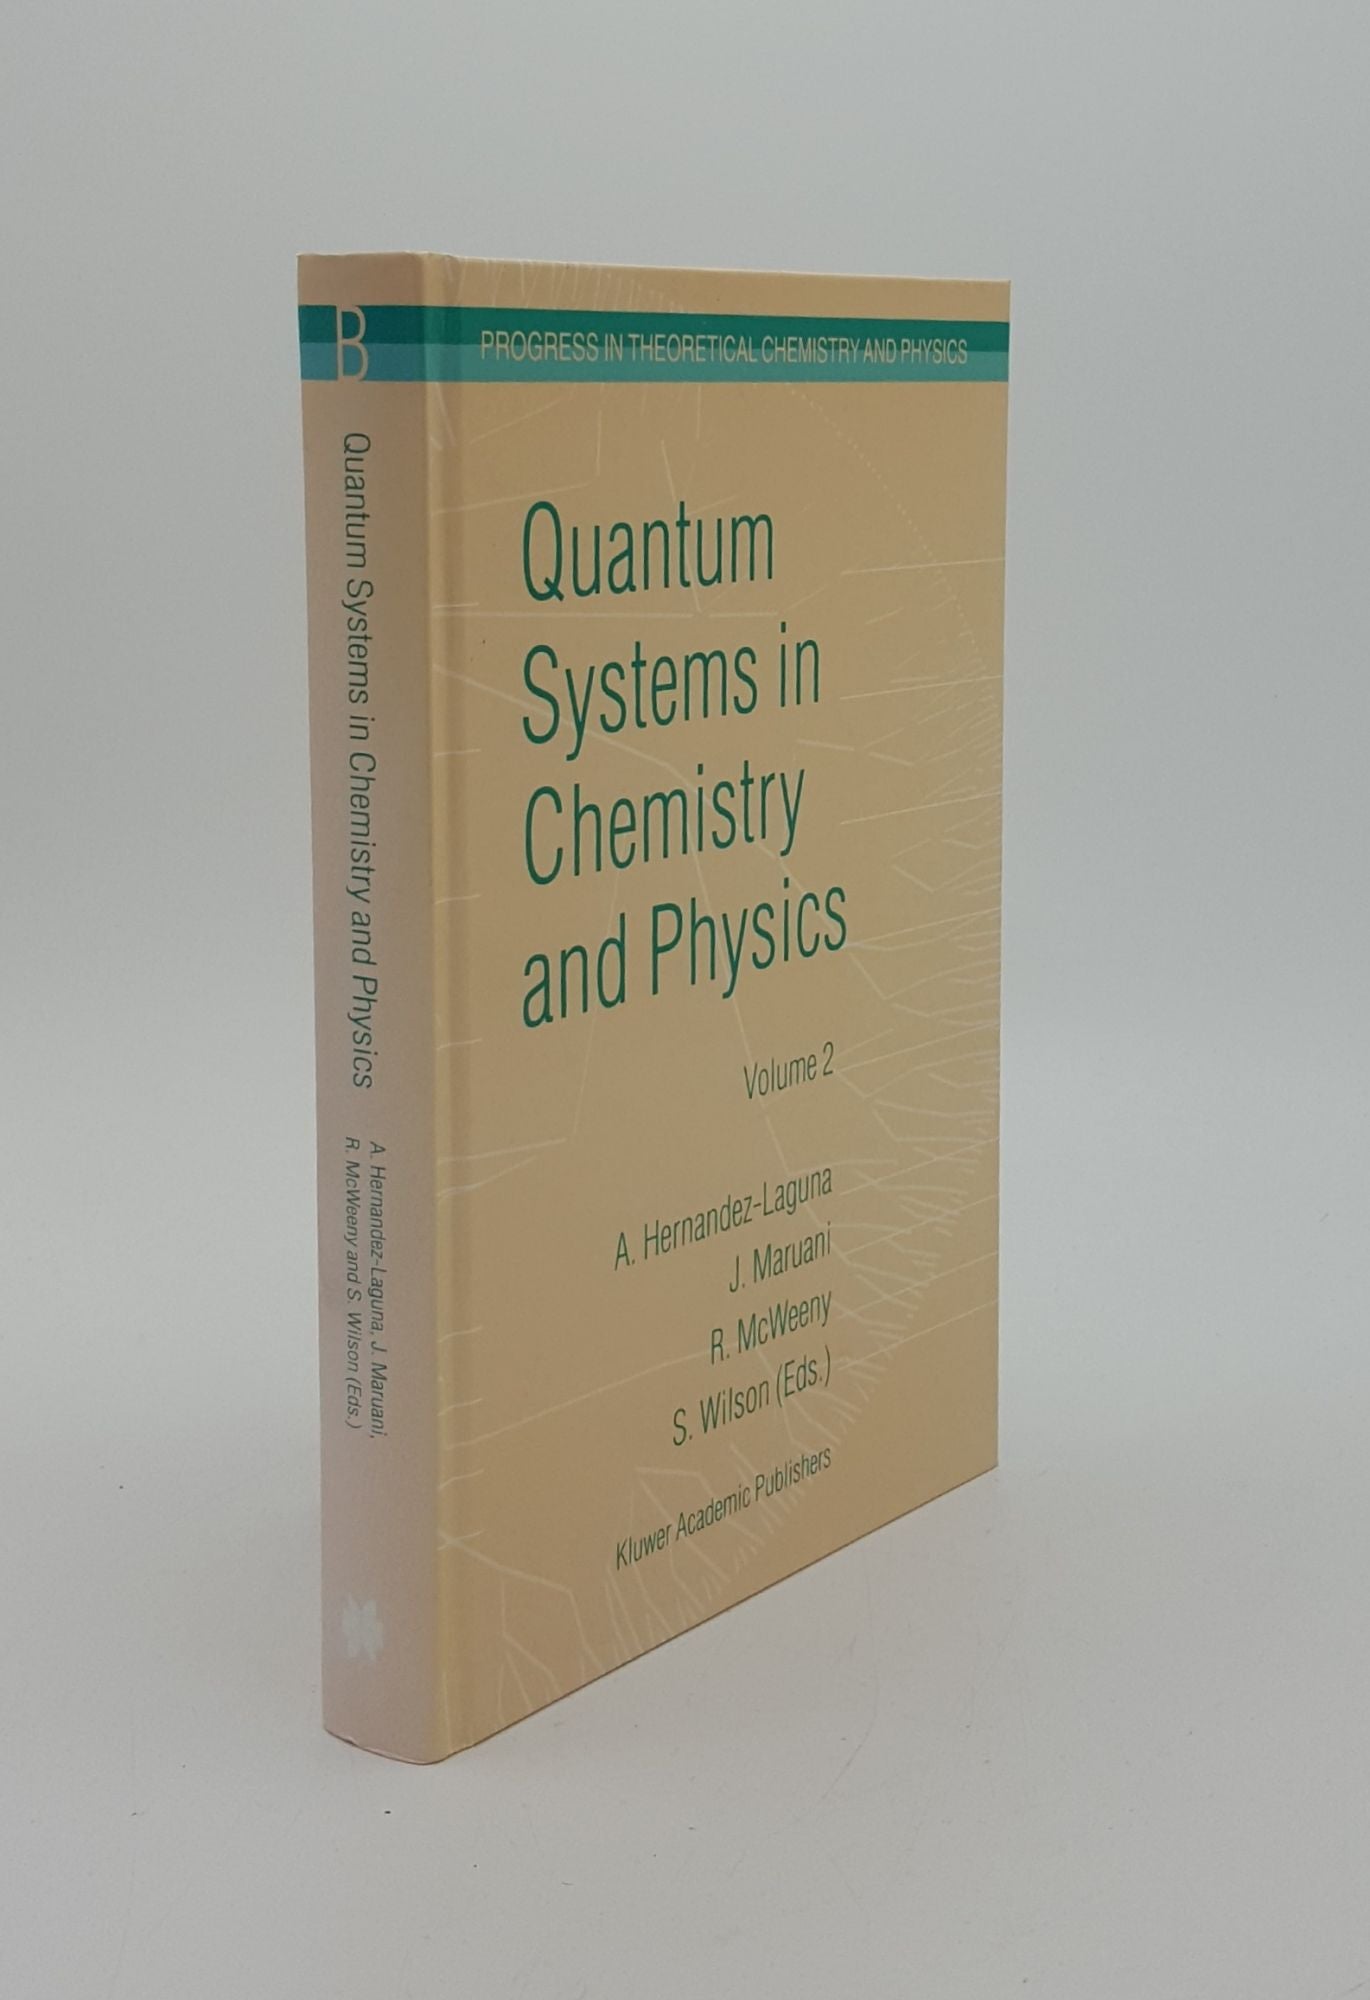 HERNNDEZ-LAGUNA Alfonso , MARUANI Jean, MCWEENY Roy, WILSON Stephen - Quantum Systems in Chemistry and Physics Volume 2 Advanced Problems and Complex Systems (Progress in Theoretical Chemistry & Physics)